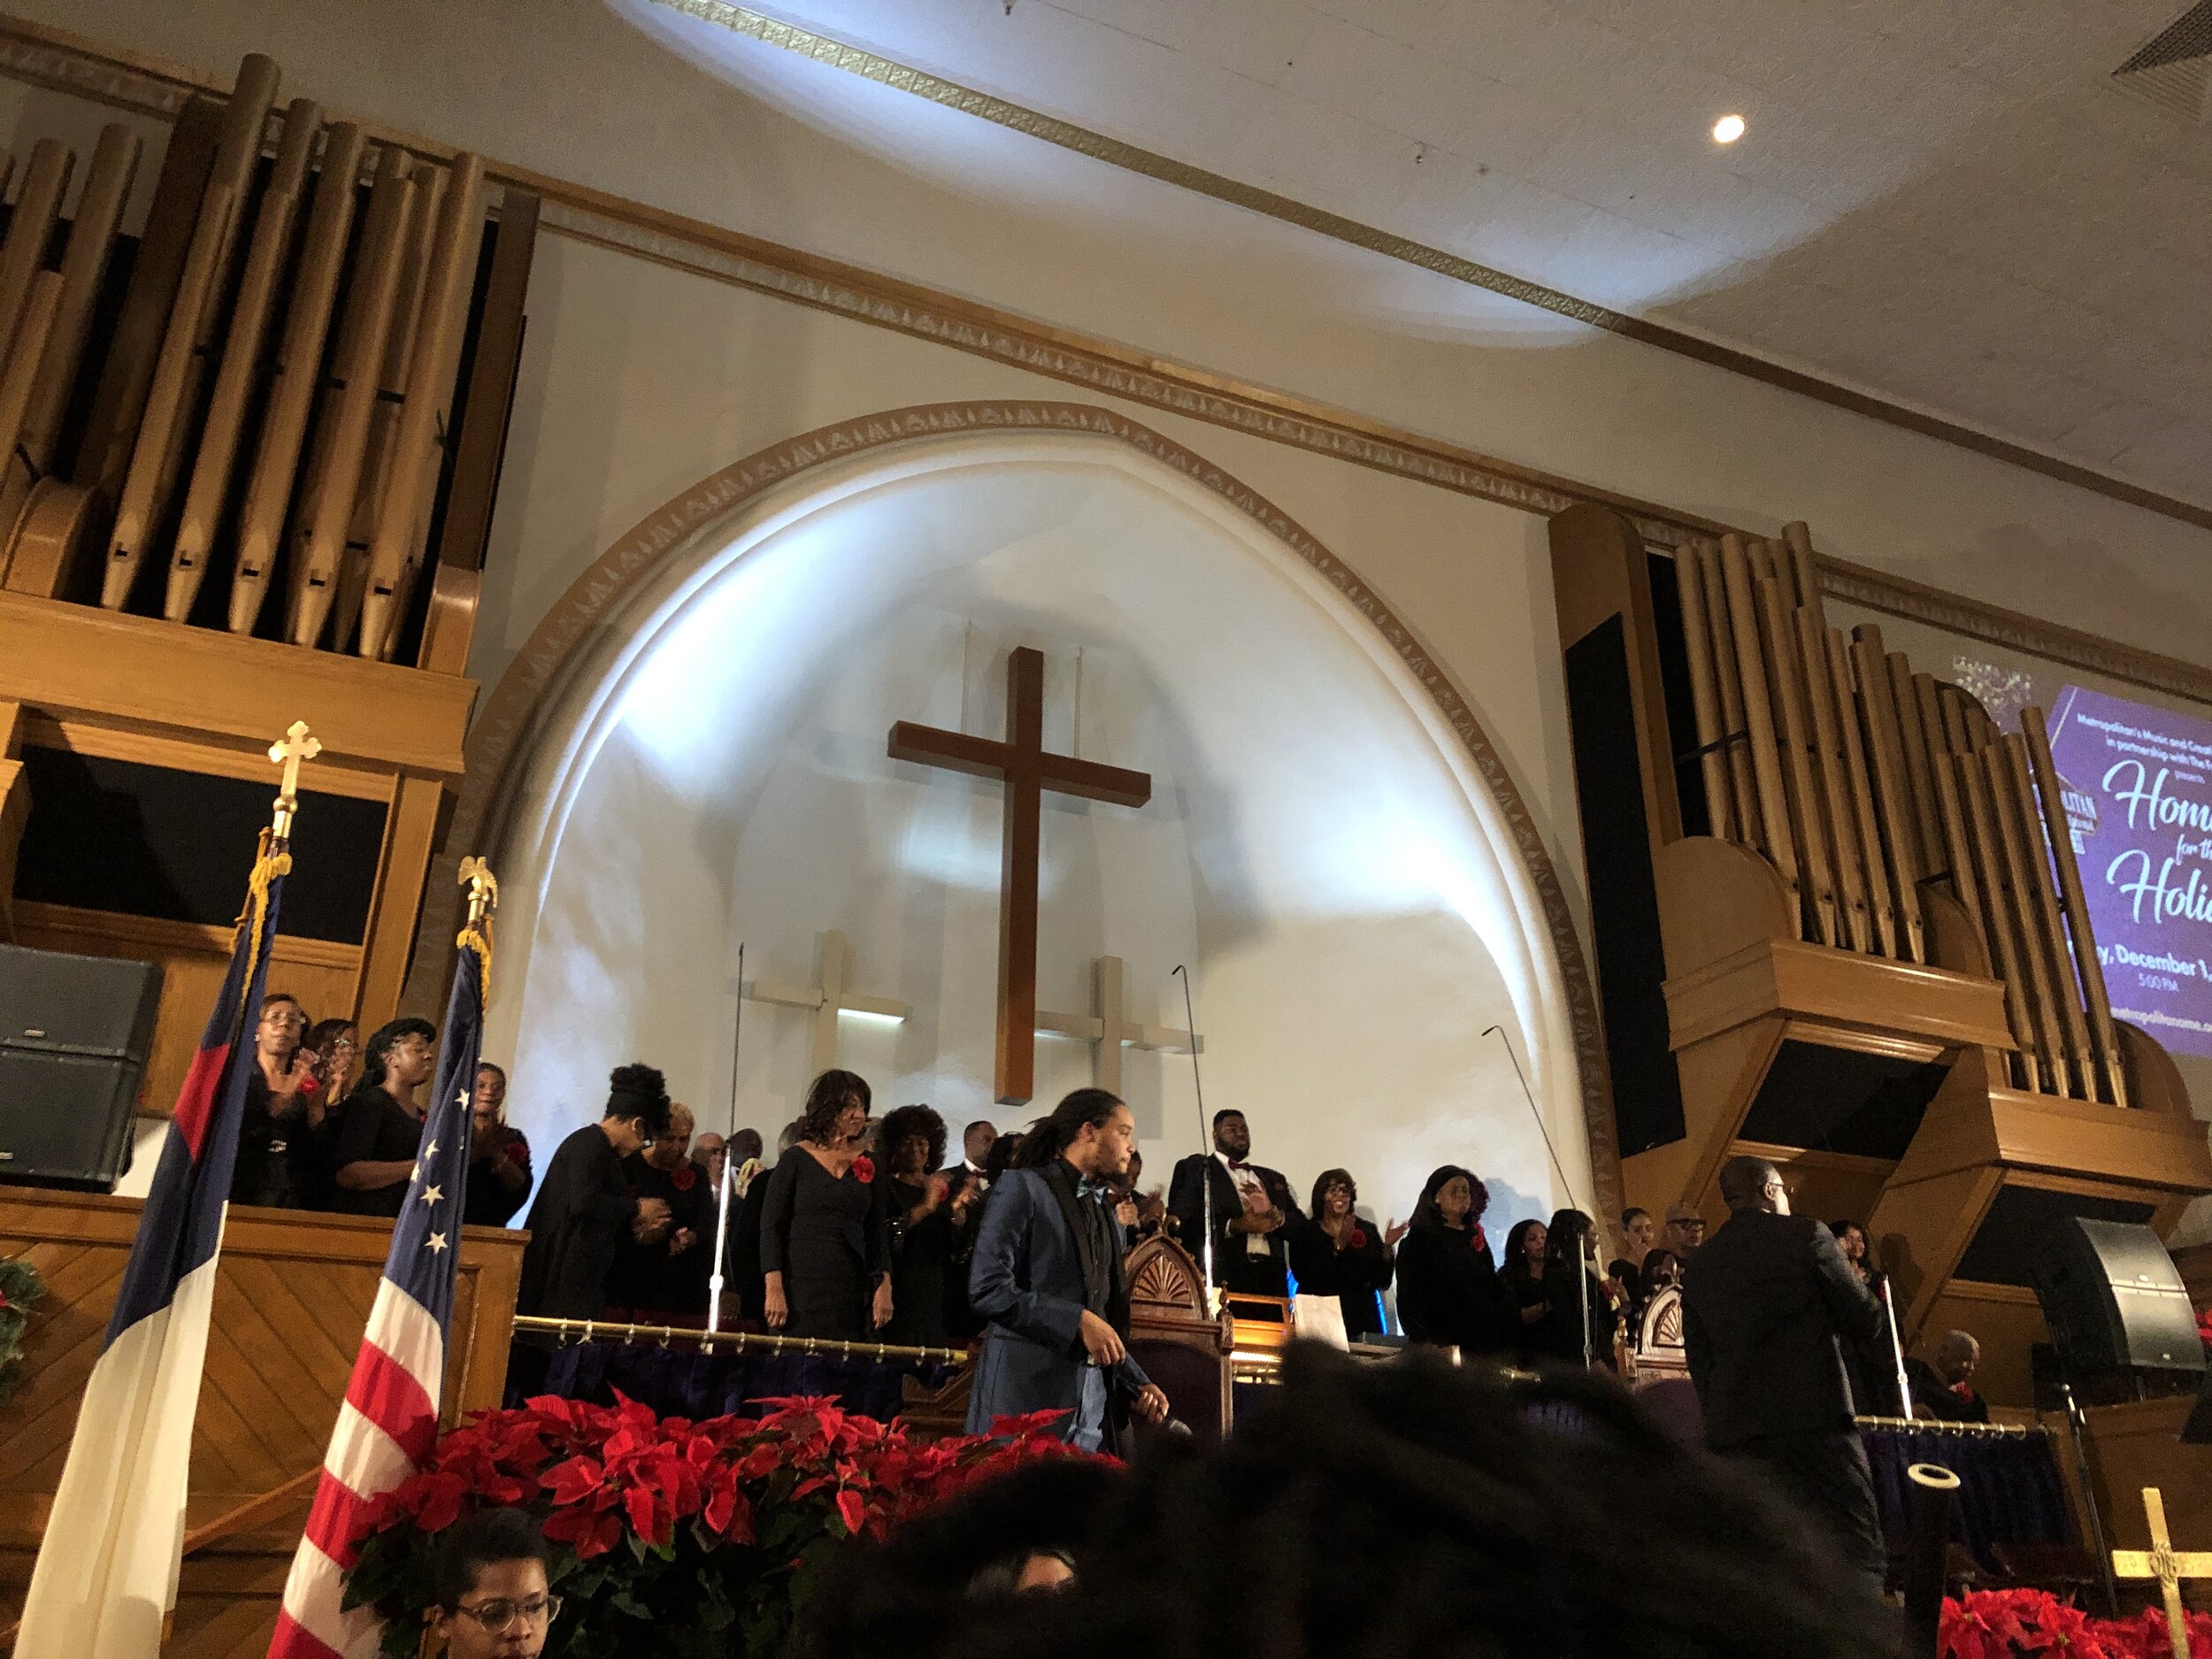 Members of the orchestra perform as part of Metropolitan AME’s: The Family Room - celebrating an event of Messiah, gospel songs and spirituals. Dec 1, 2019.